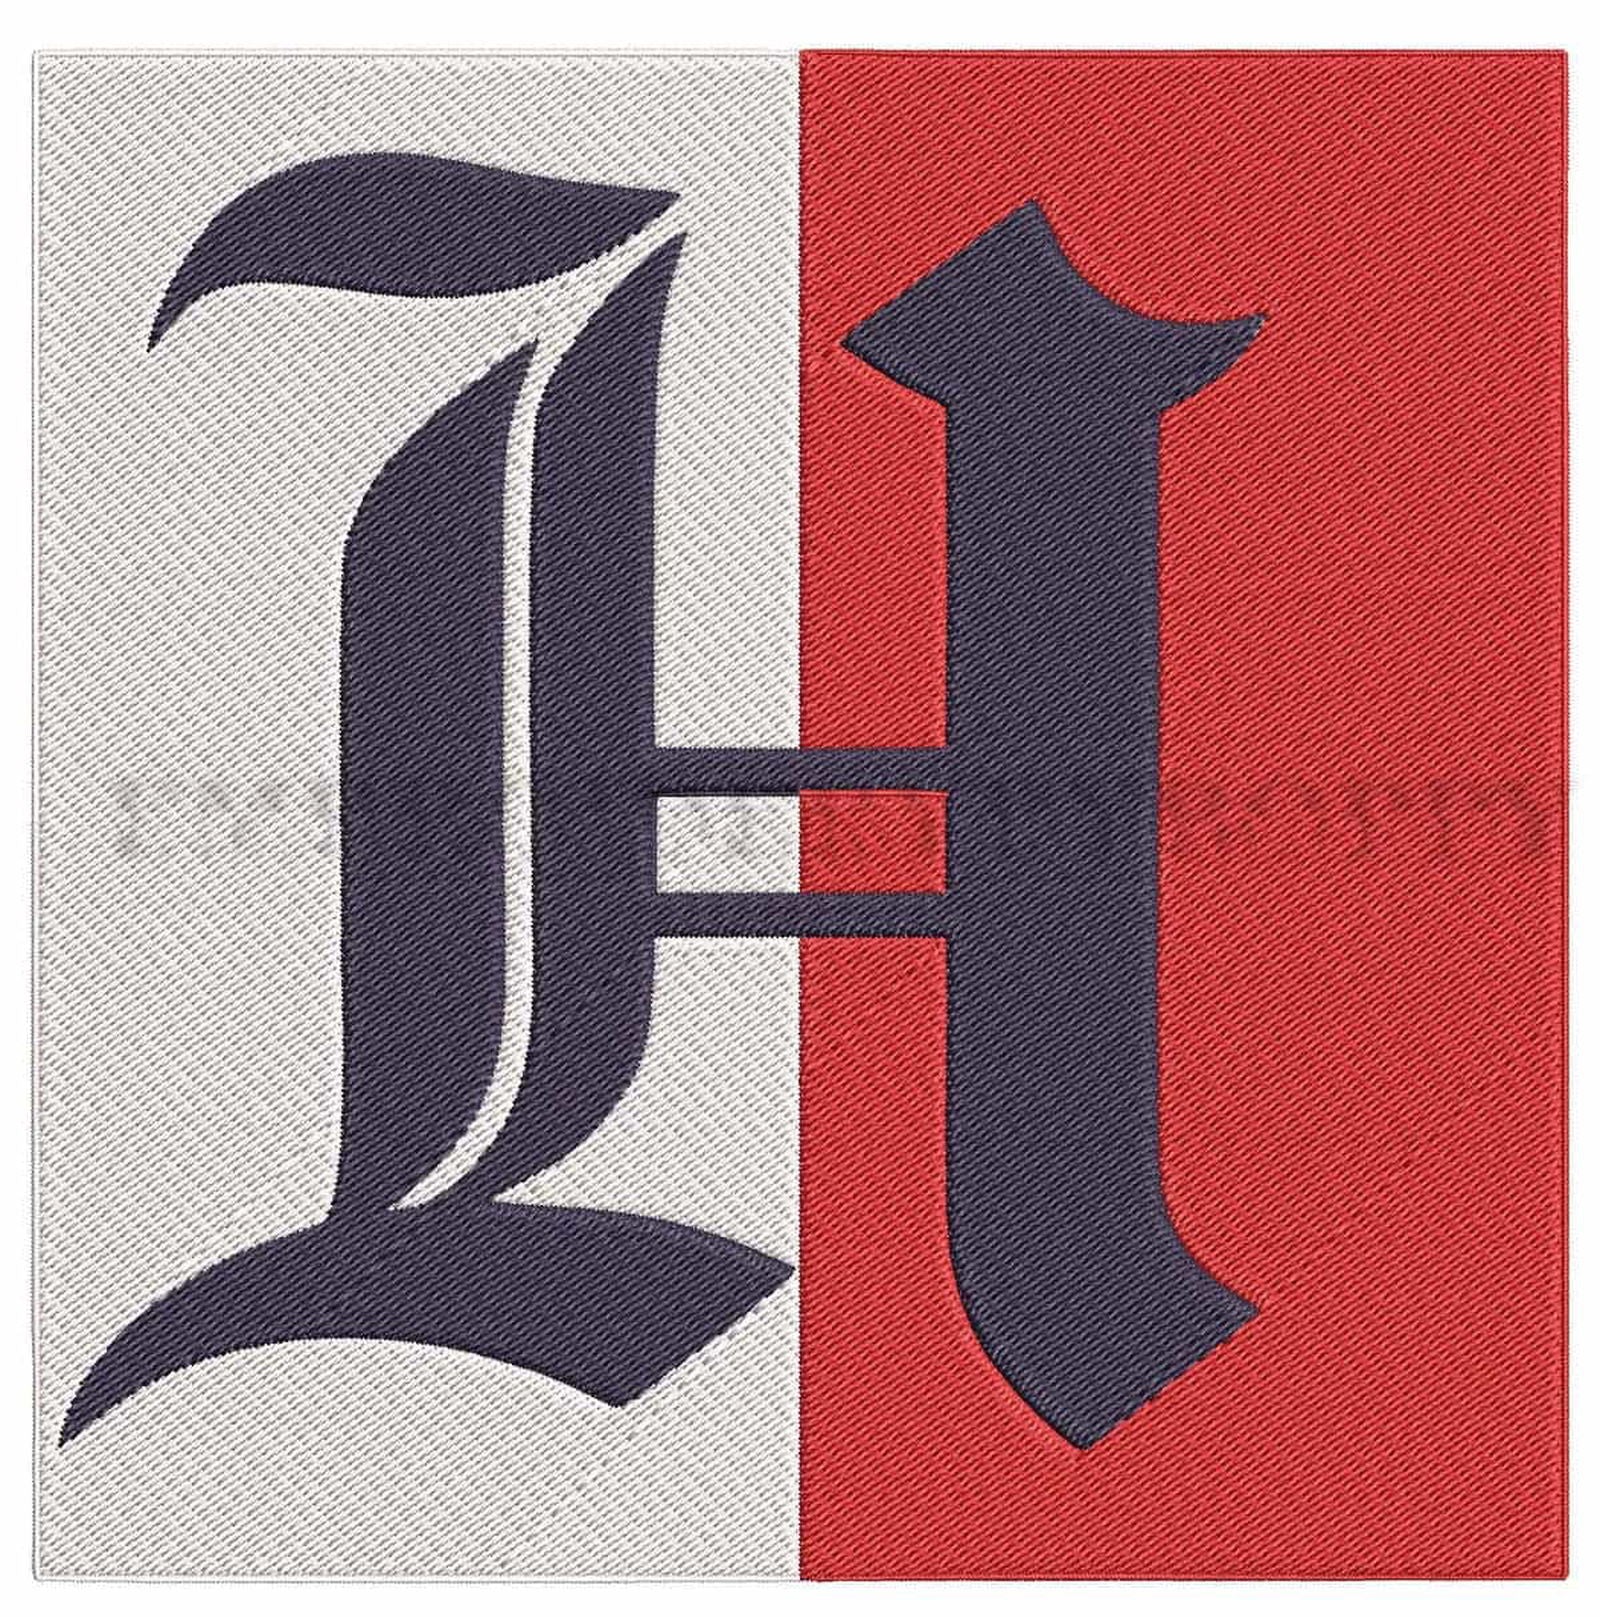 Tommy Hilfiger Lewis H.- 2 sizes- Embroidery Design - FineryEmbroidery